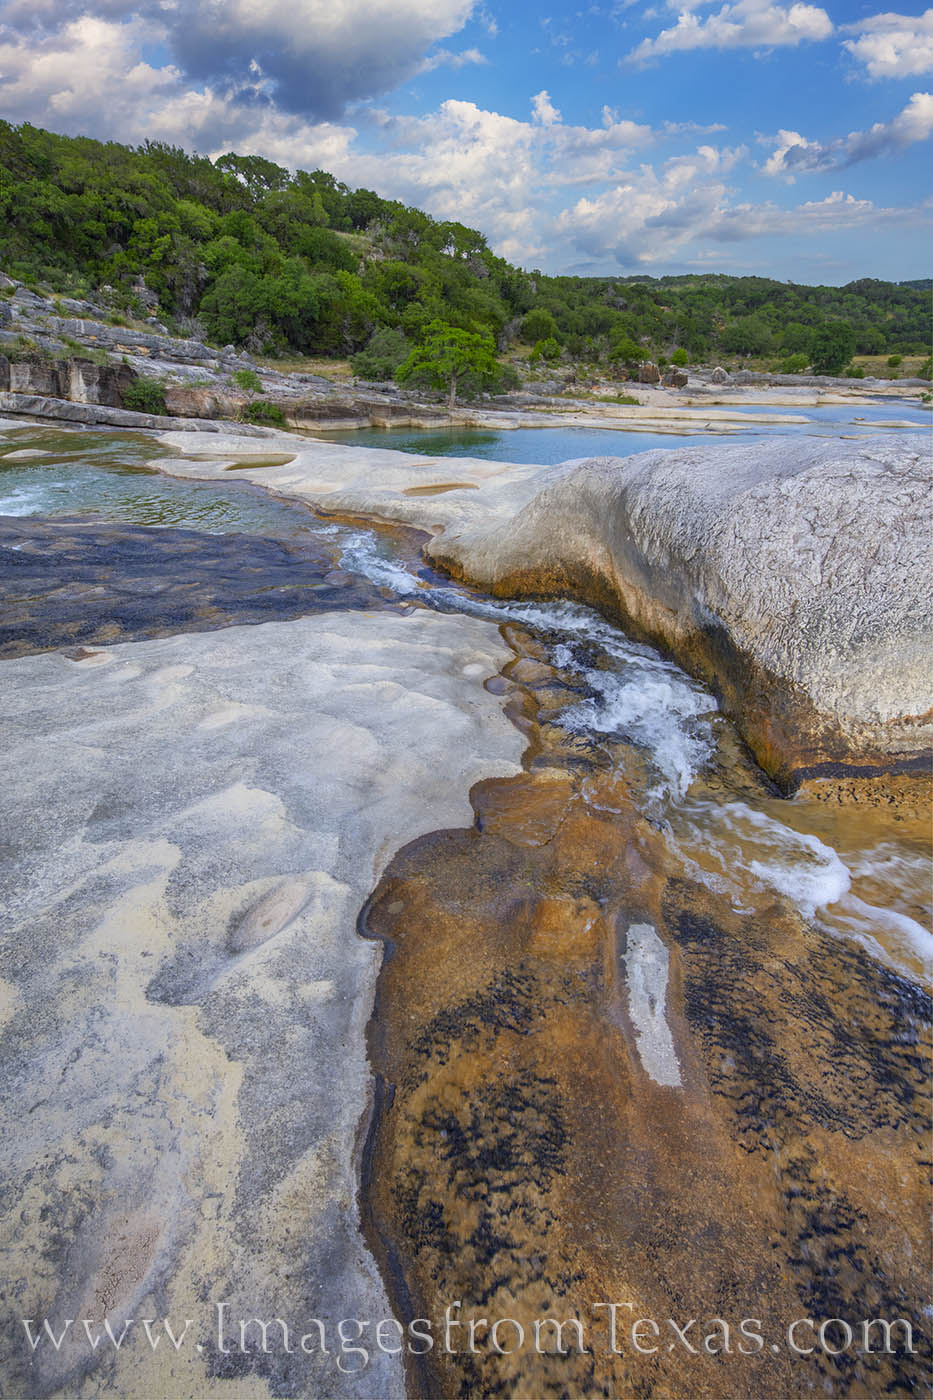 Half limestone rock, half clean, cool water, this image of the river basin in Pedernales Falls State Park shows the contrast...